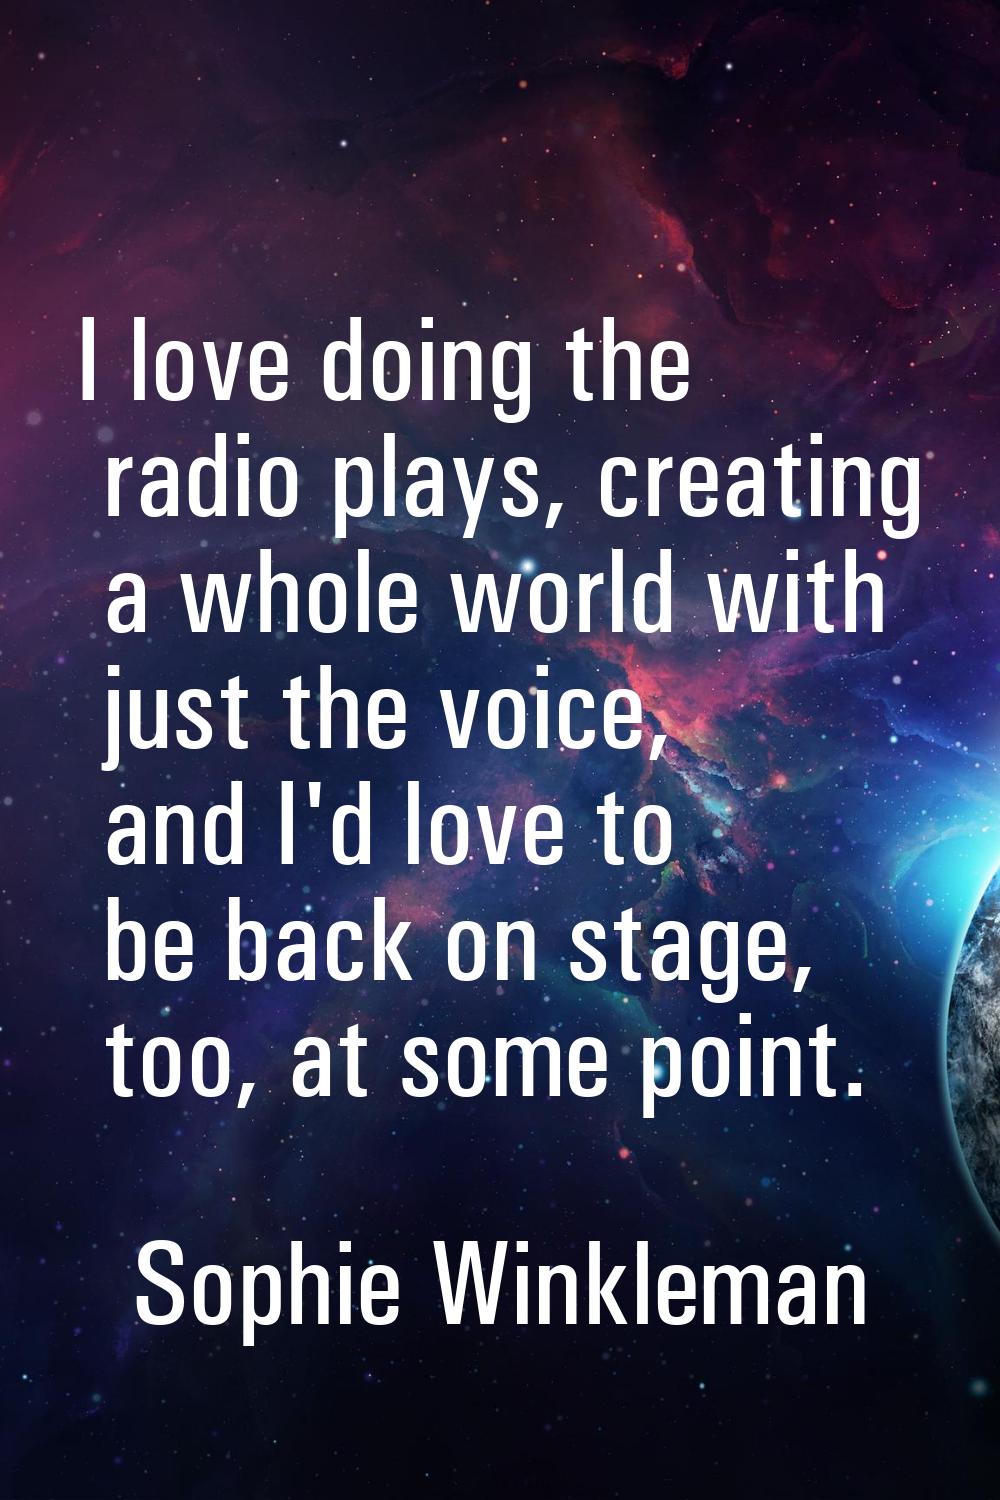 I love doing the radio plays, creating a whole world with just the voice, and I'd love to be back o